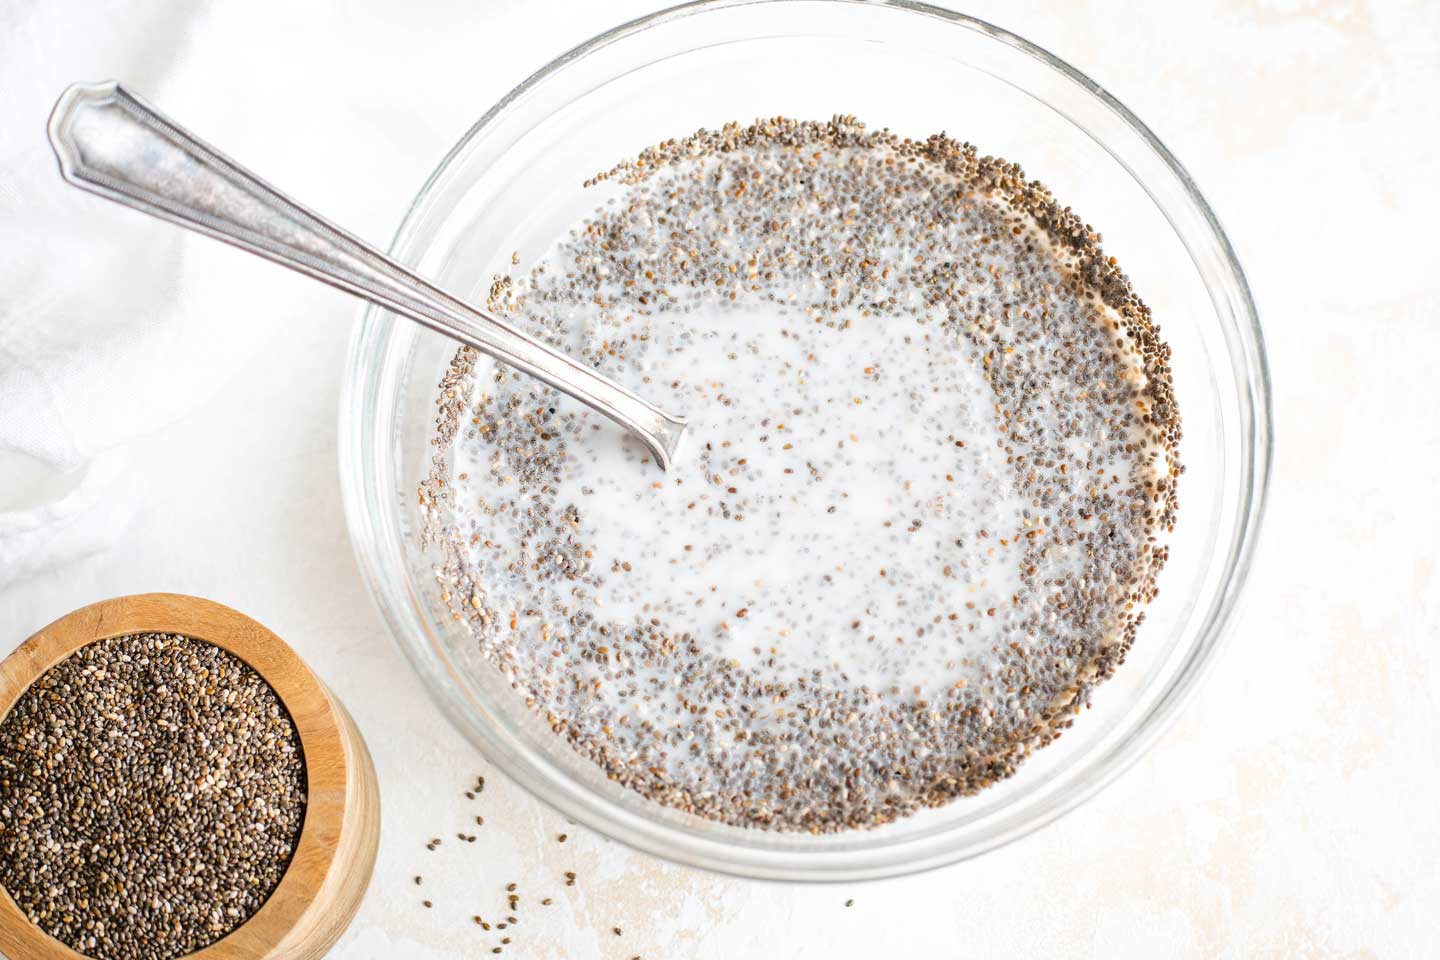 Mixing bowl of partially mixed Chia Seed Pudding, with small bowl of chia seeds to the side